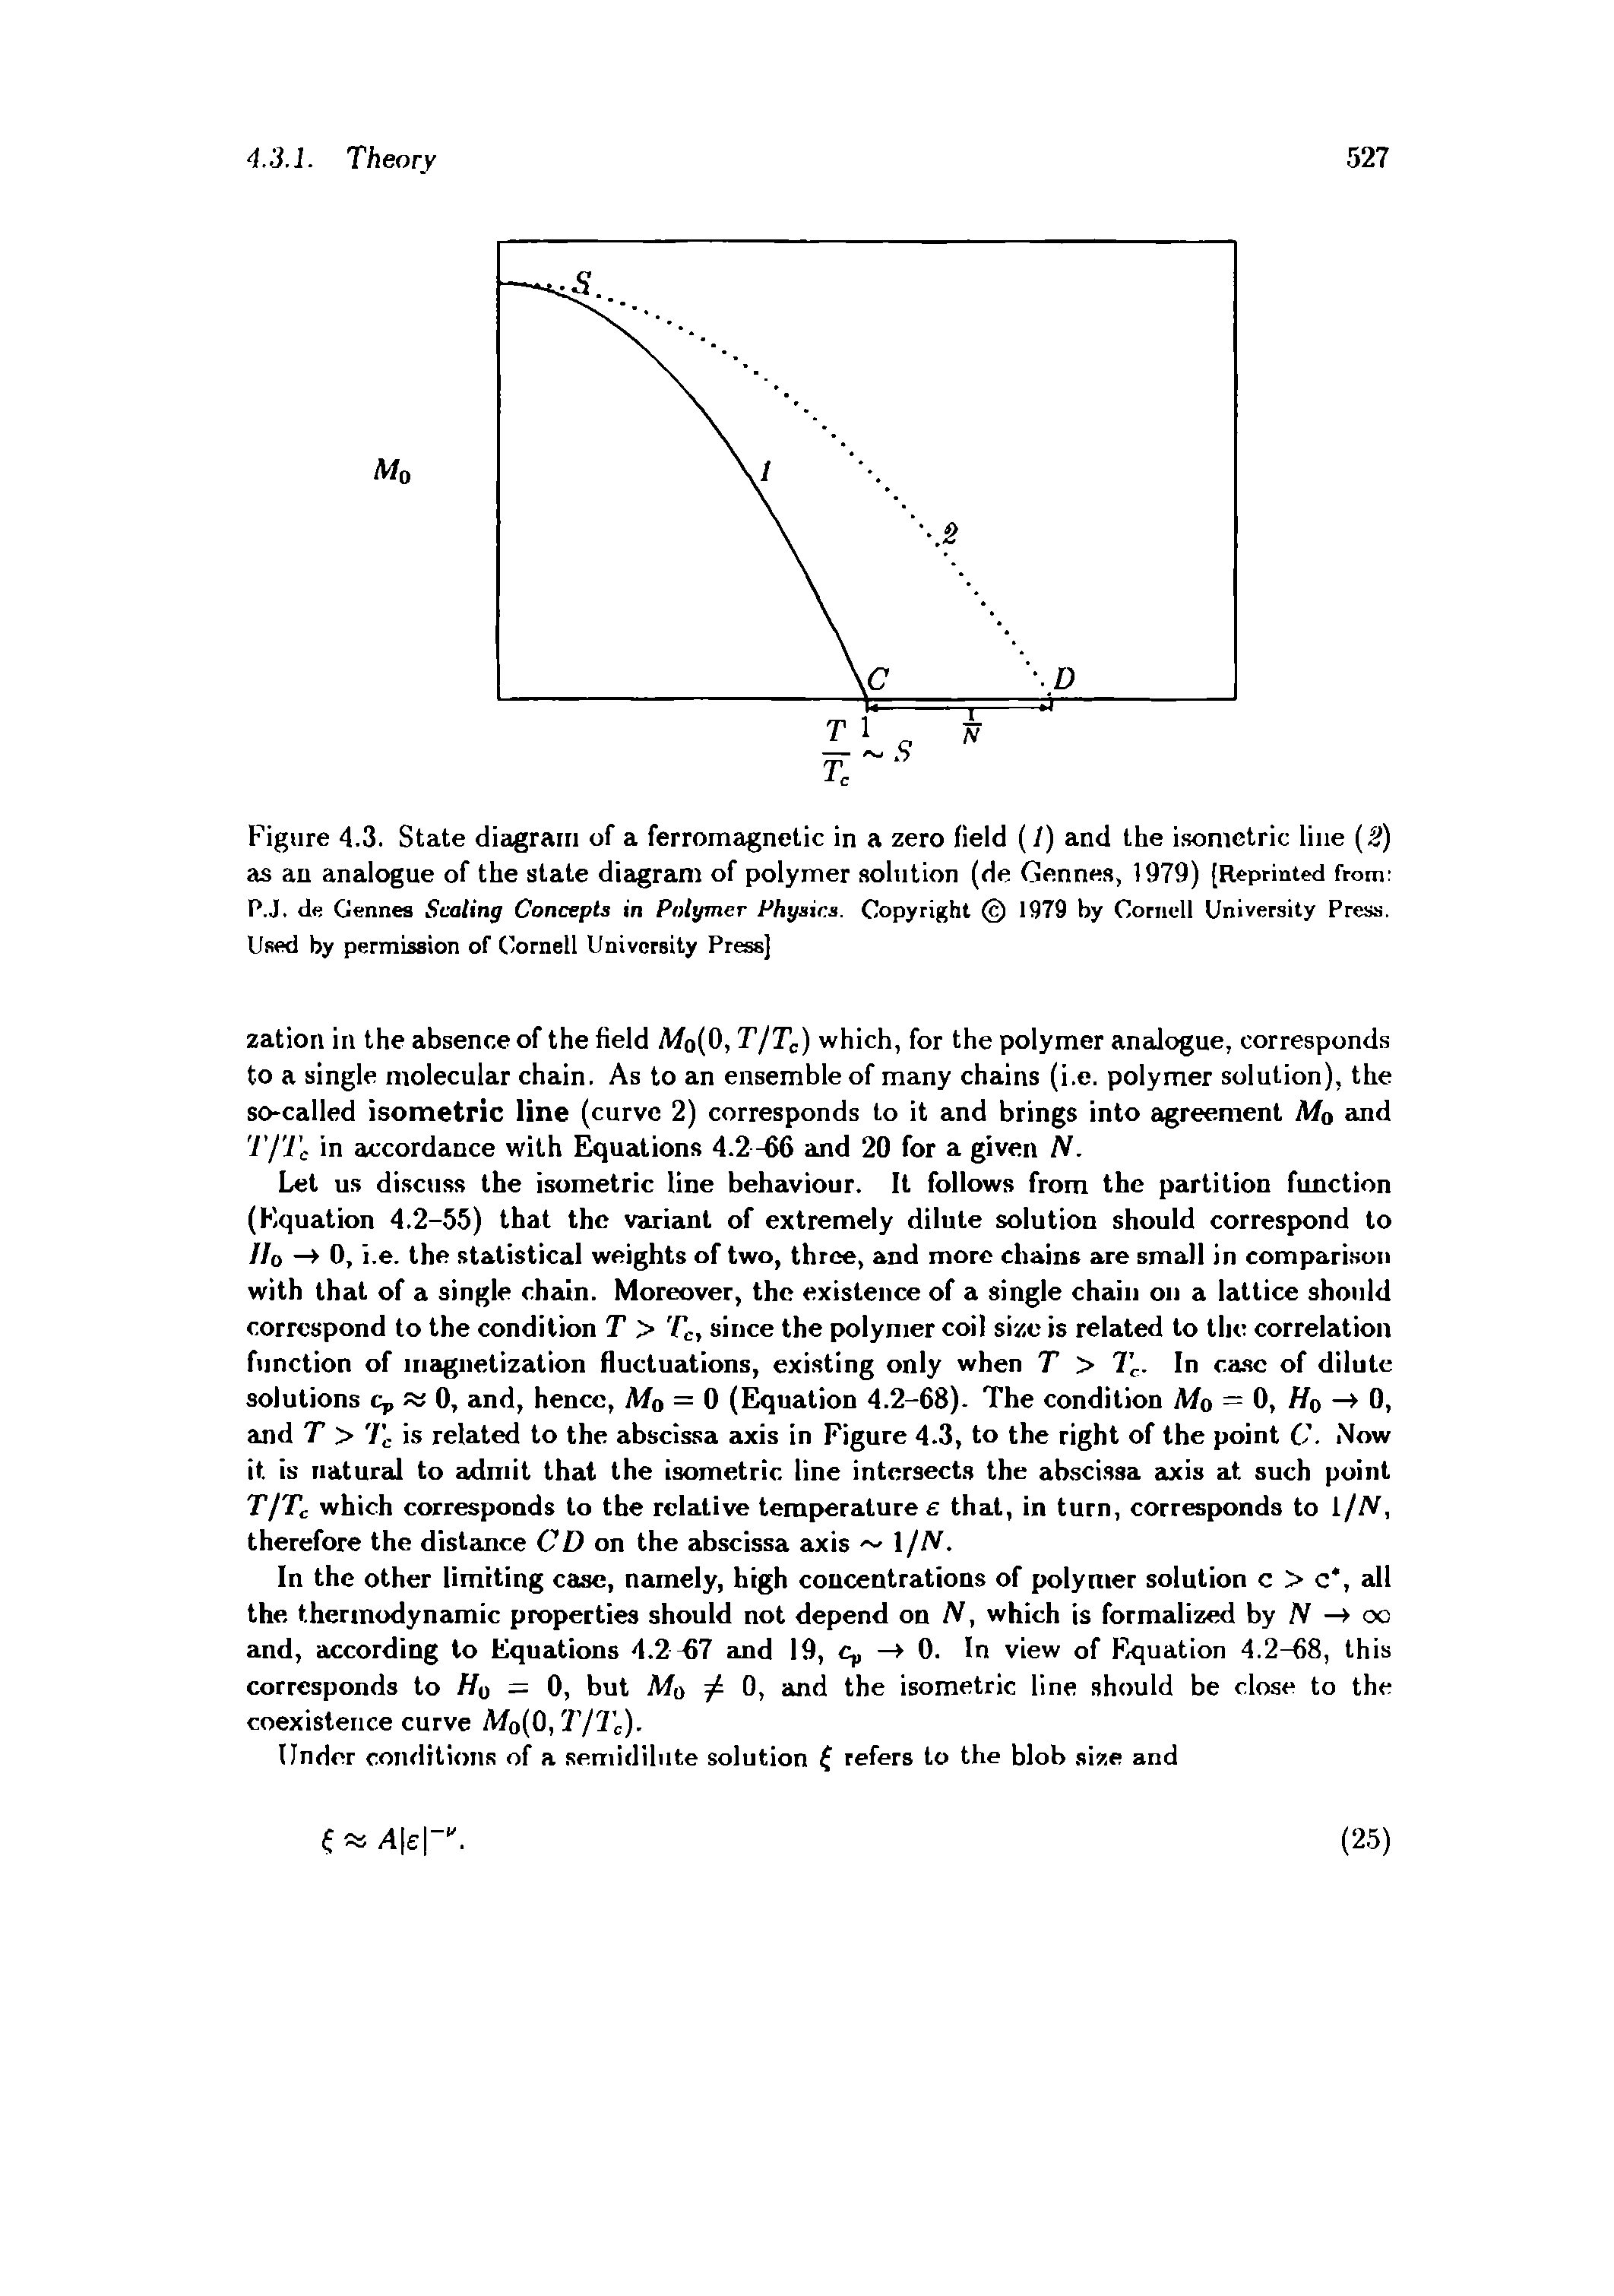 Figure 4.3. State diagram of a ferromcignetic in a zero field (/) and the isometric line (2) as an analogue of the state diagram of polymer solution (de Gennes, 1979) [Reprinted from P.J. de Gennes Scaling Concepts in Polymer Physics. Copyright 1979 by Coriifll University Press. Used by permission of Cornell University Press]...